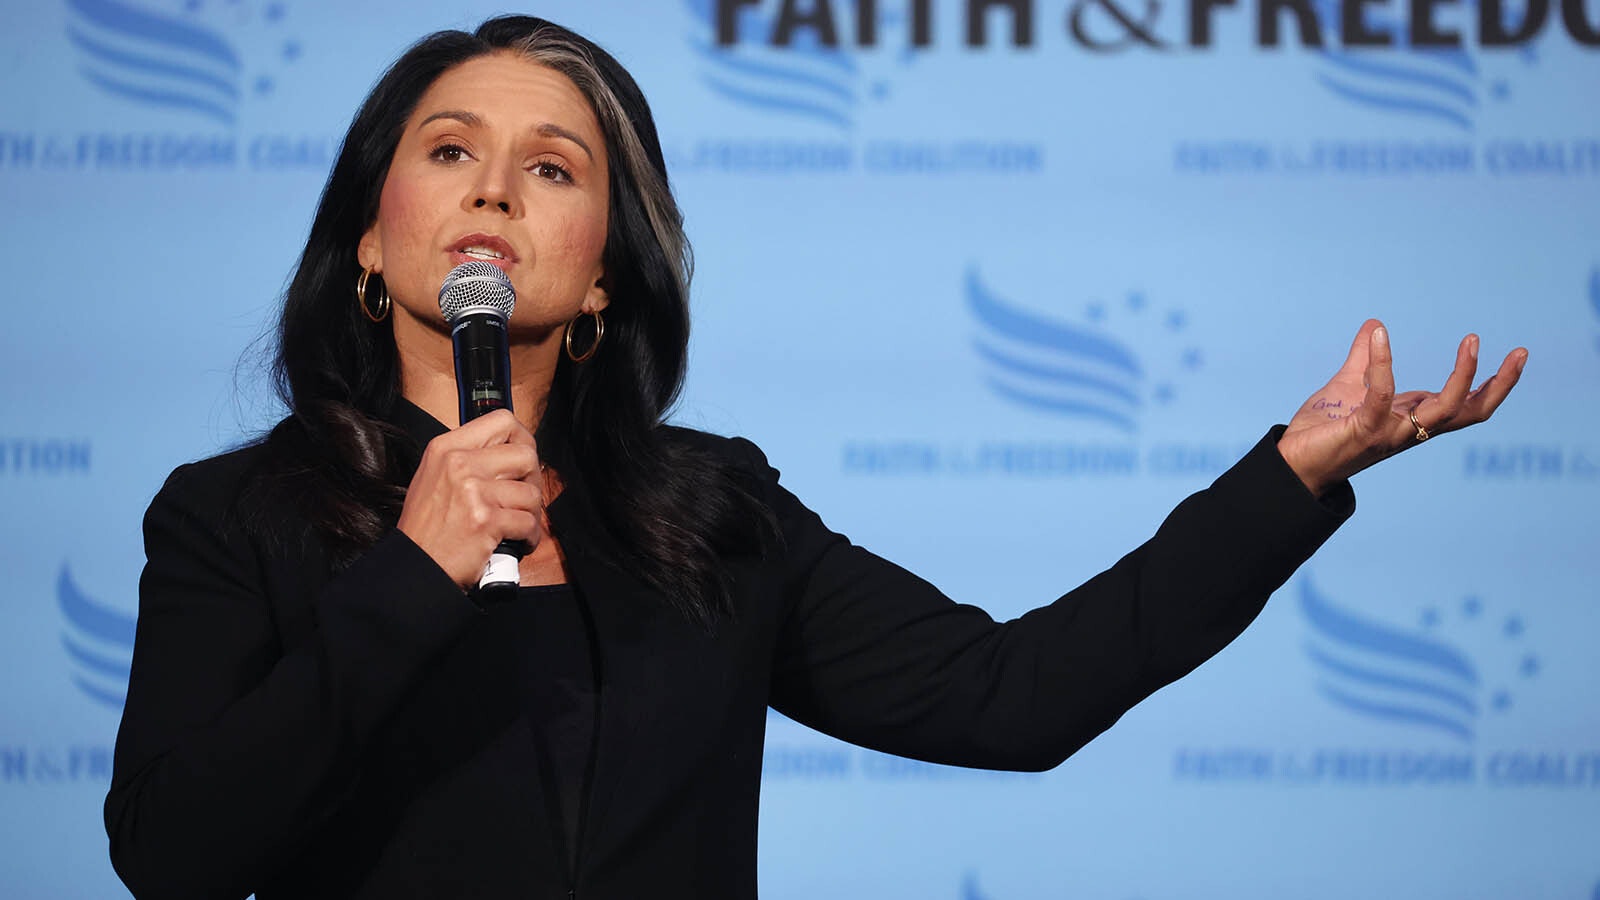 Former Democratic congresswoman from Hawaii, Tulsi Gabbard, has ditched that part and is a fast riser among the national Republican ranks.